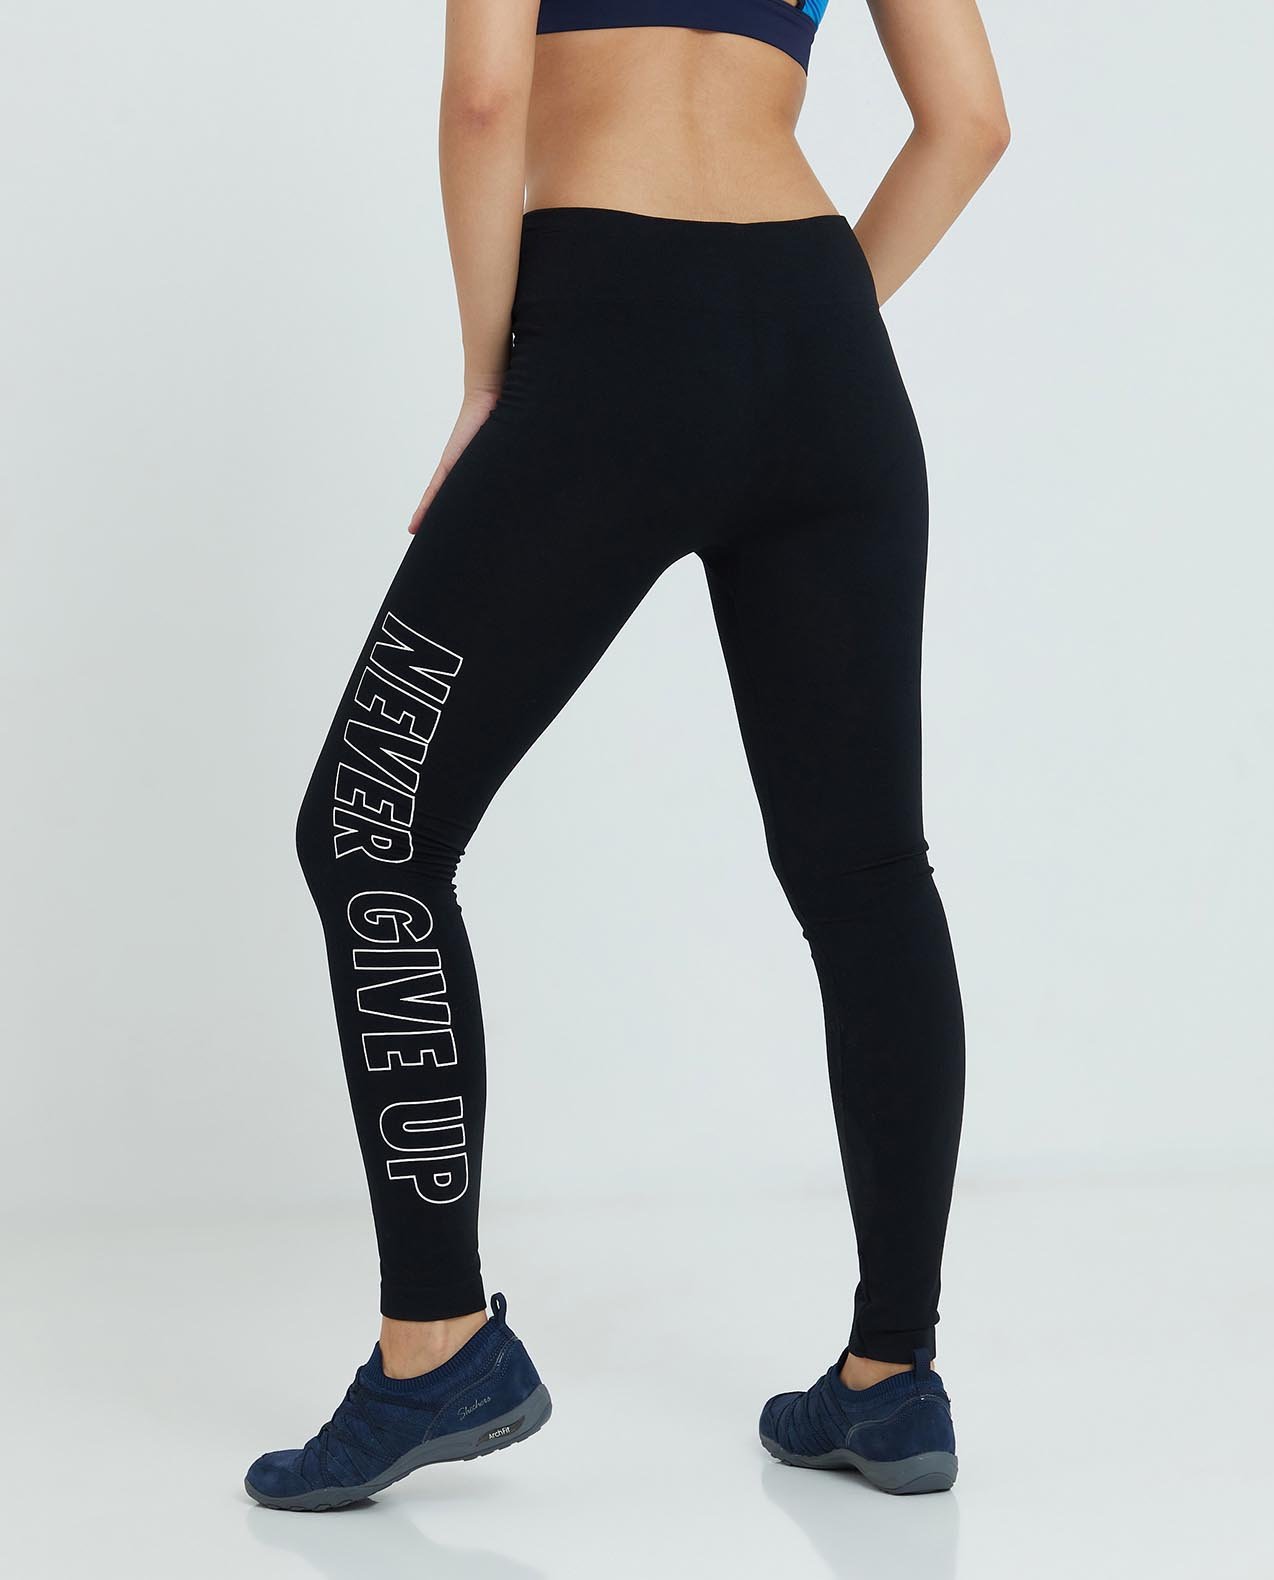 Never Give Up Leggings – Initial Outfitters